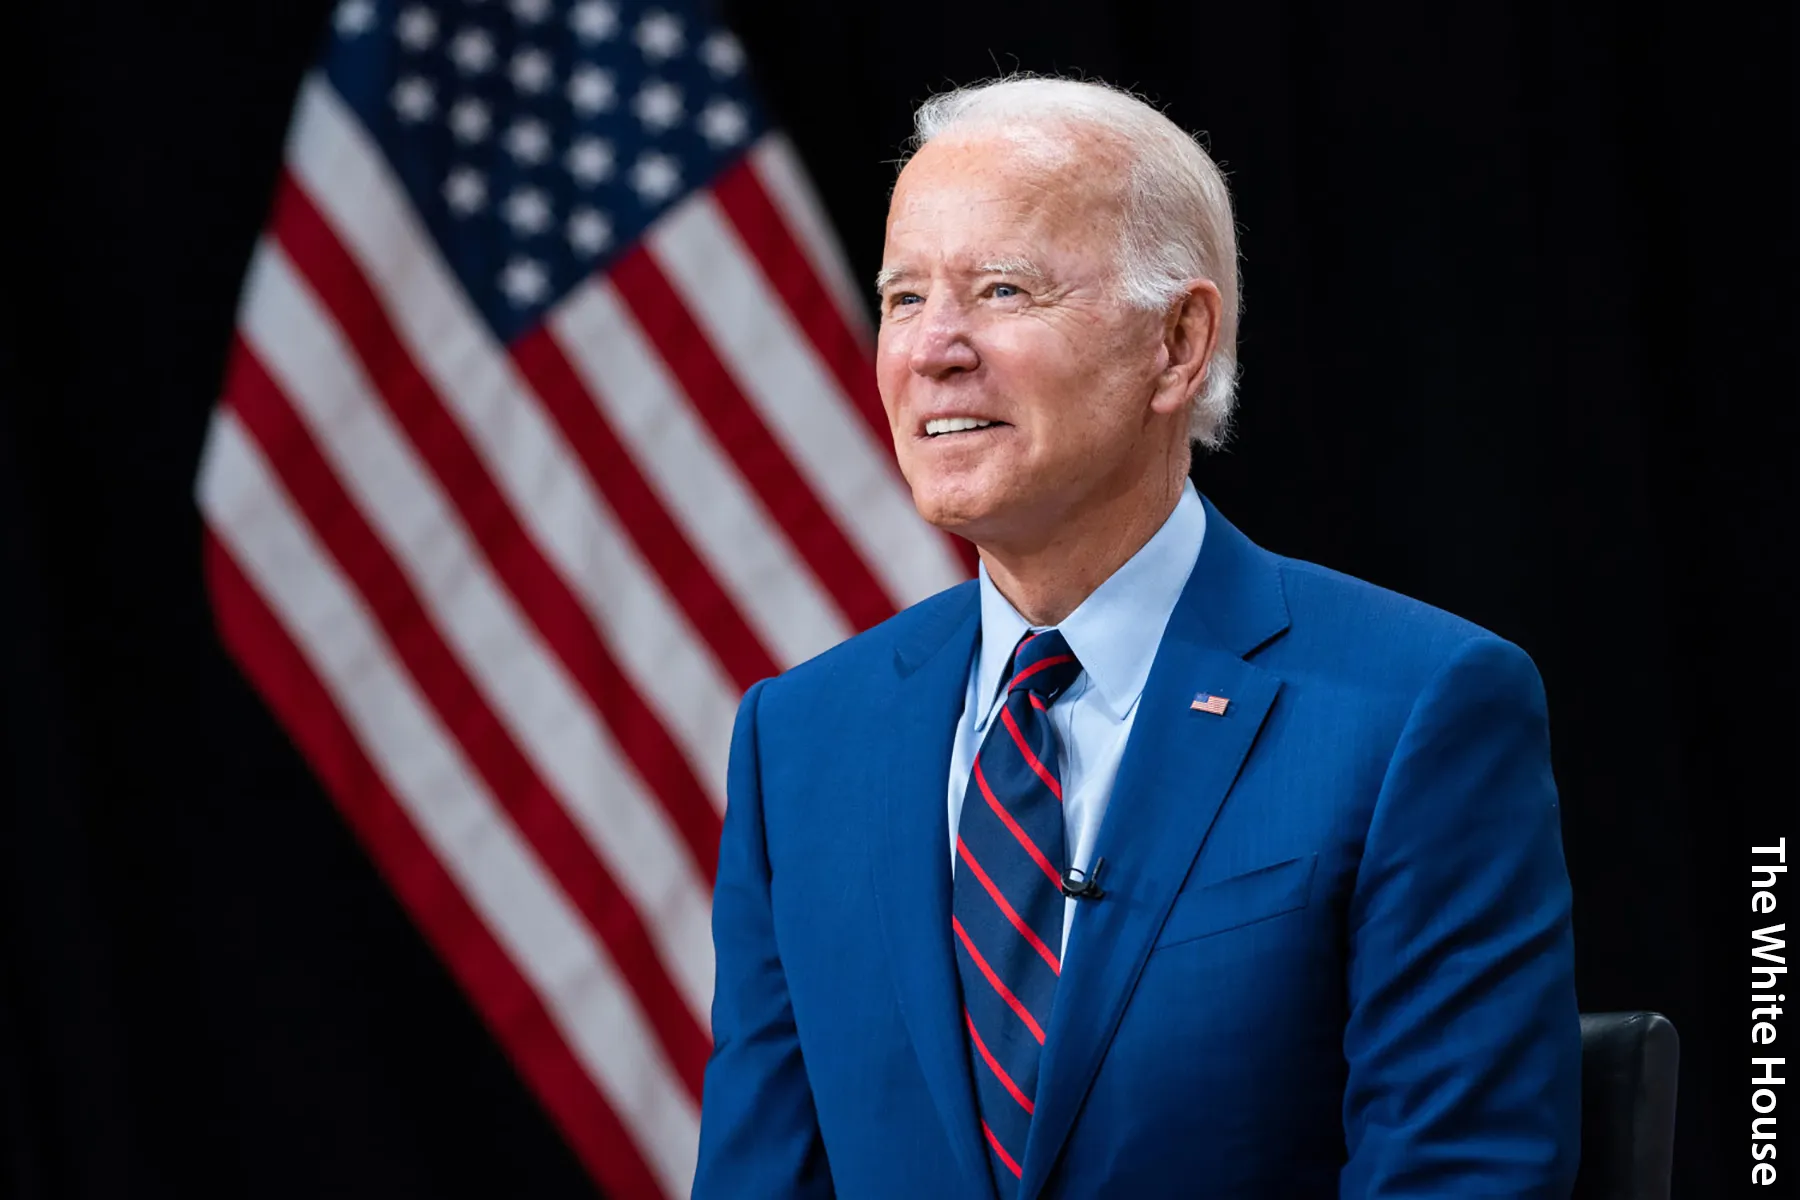 Biden Unveils ‘Test to Treat’ for COVID in State of the Union